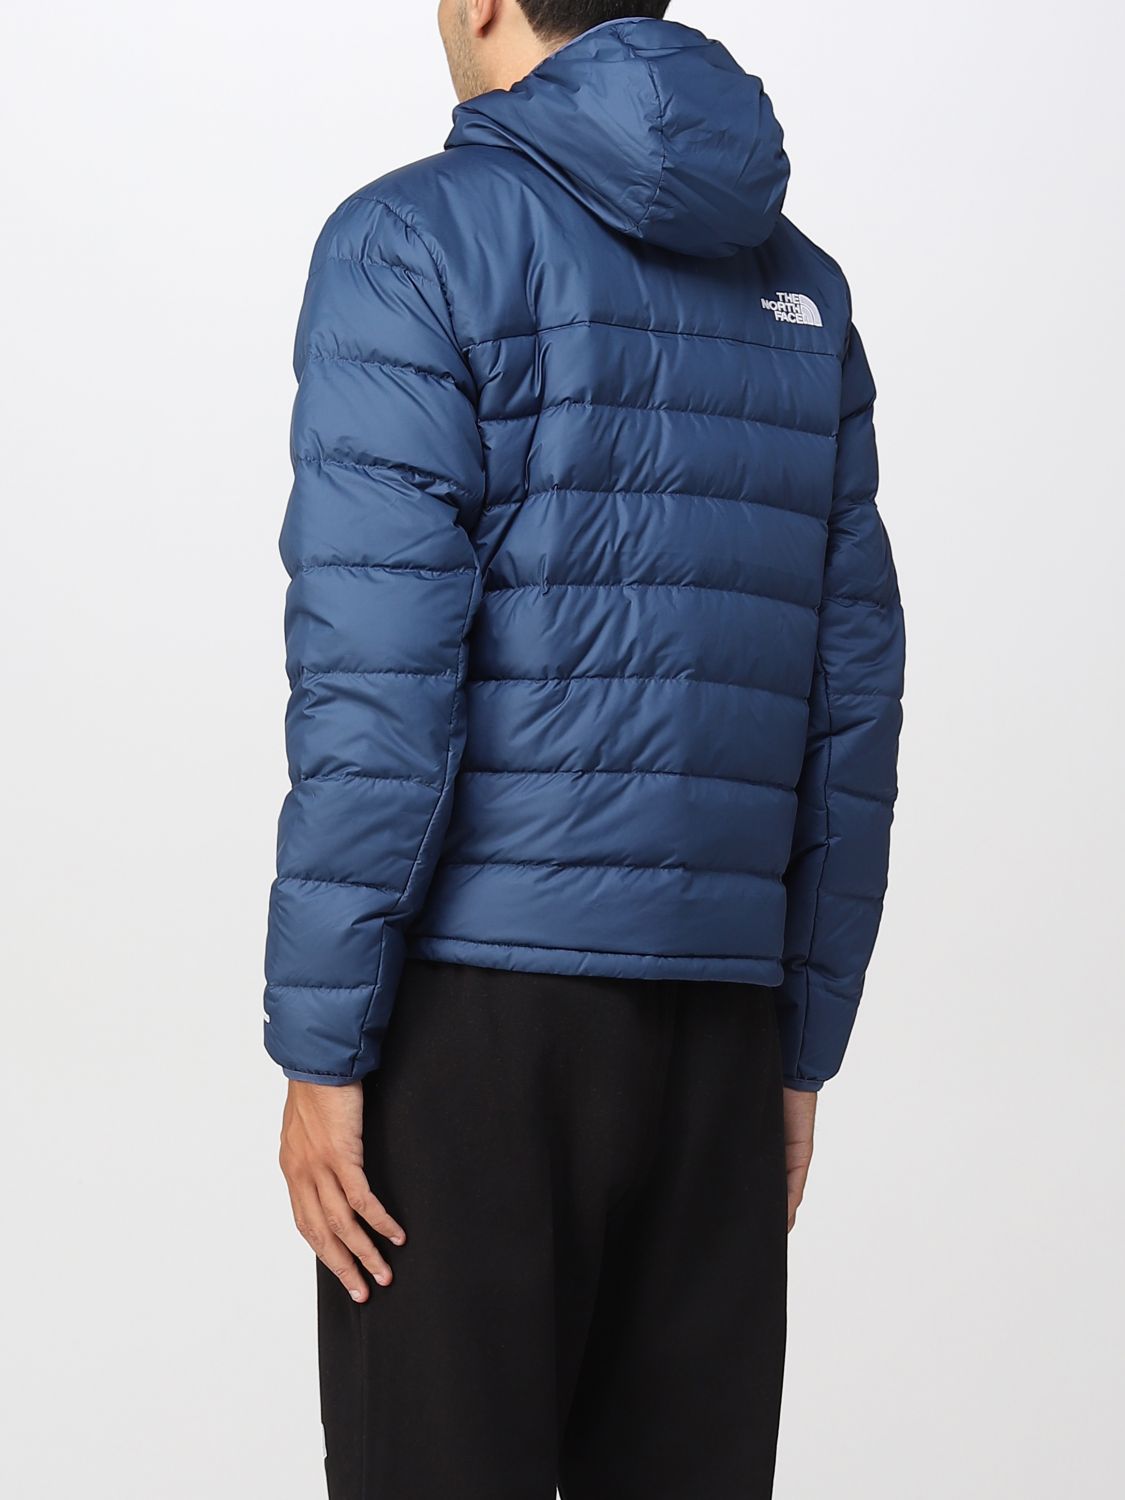 THE NORTH FACE: jacket for men - Blue | The North Face jacket NF0A4R26 ...